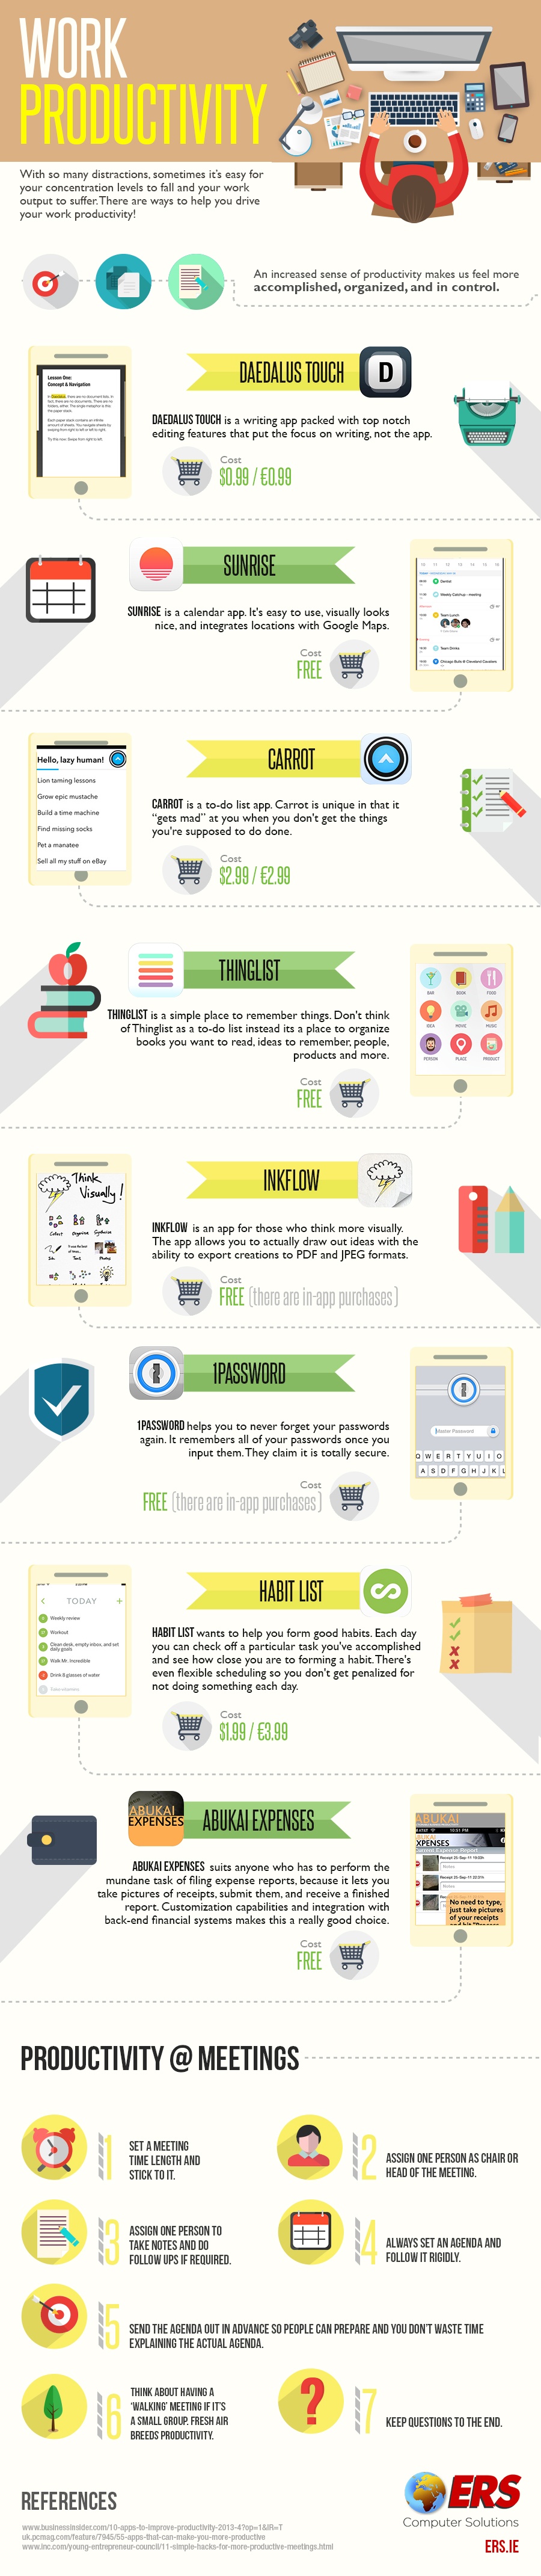 Productivity-at-Work-Infographic-2